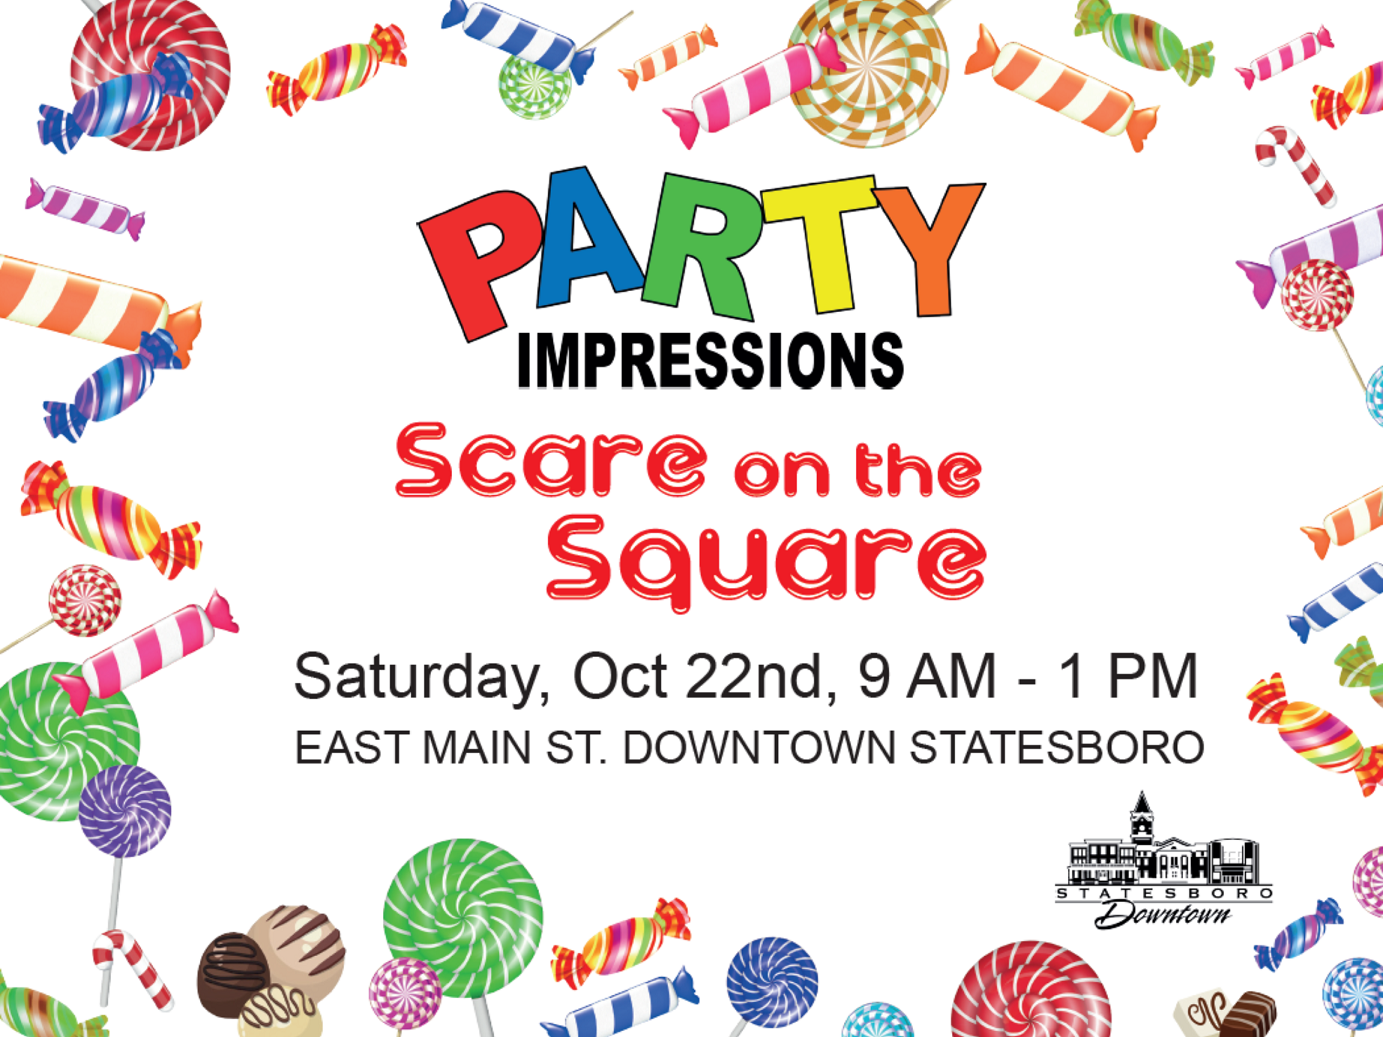 Scare on the Square Set for October 22nd Visit Statesboro